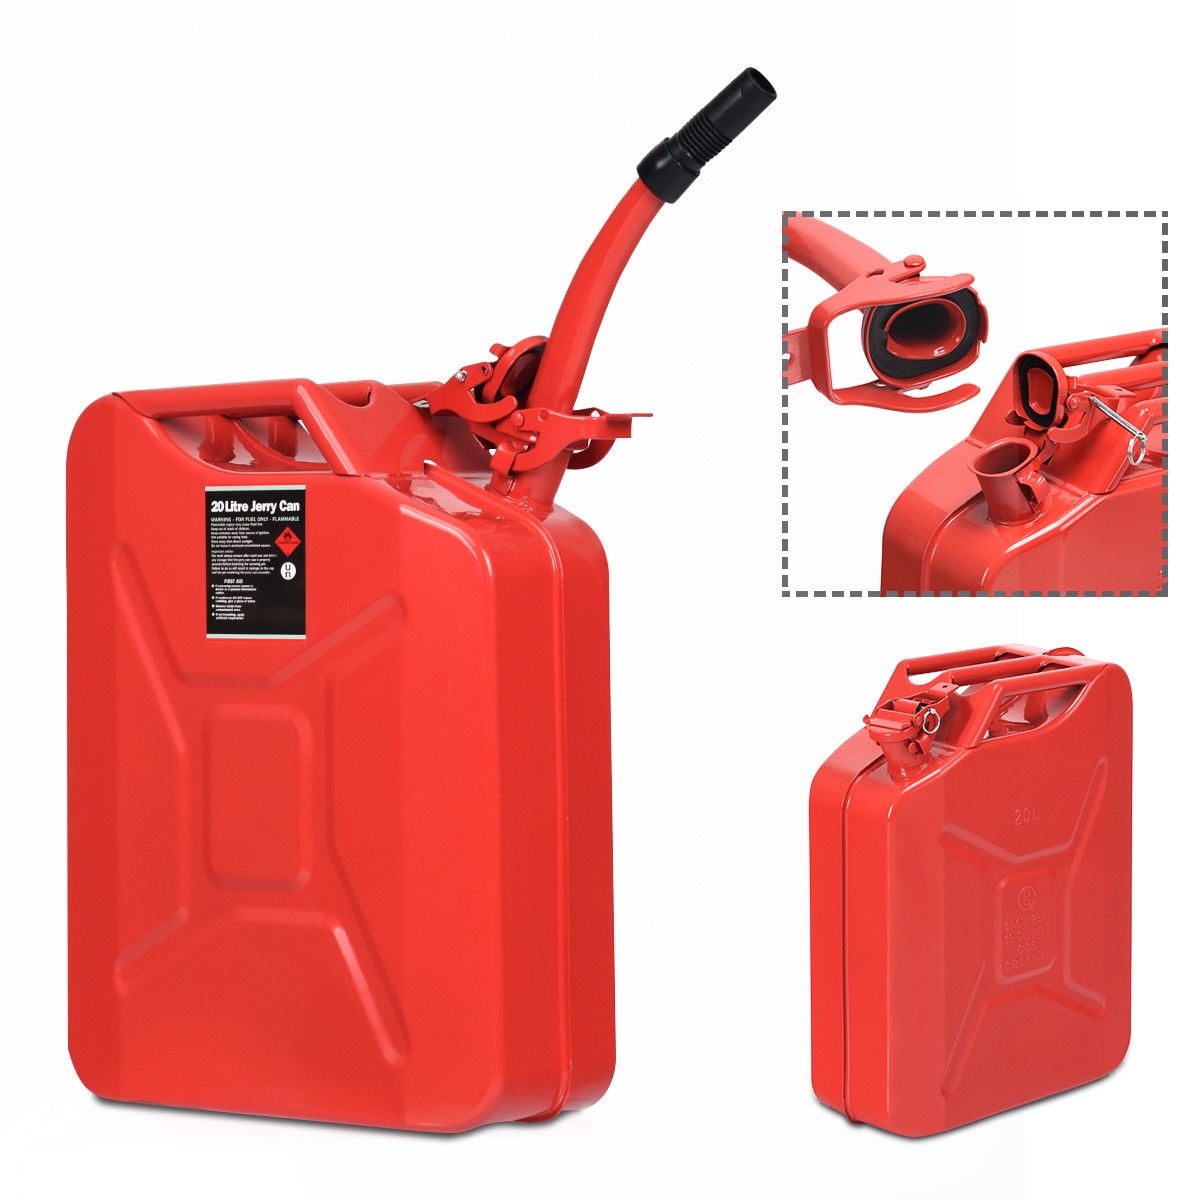 5 Gal 20L Petrol Gas Gasoline Jerry Fule Can Tank Car Scooter Emergency Backup 